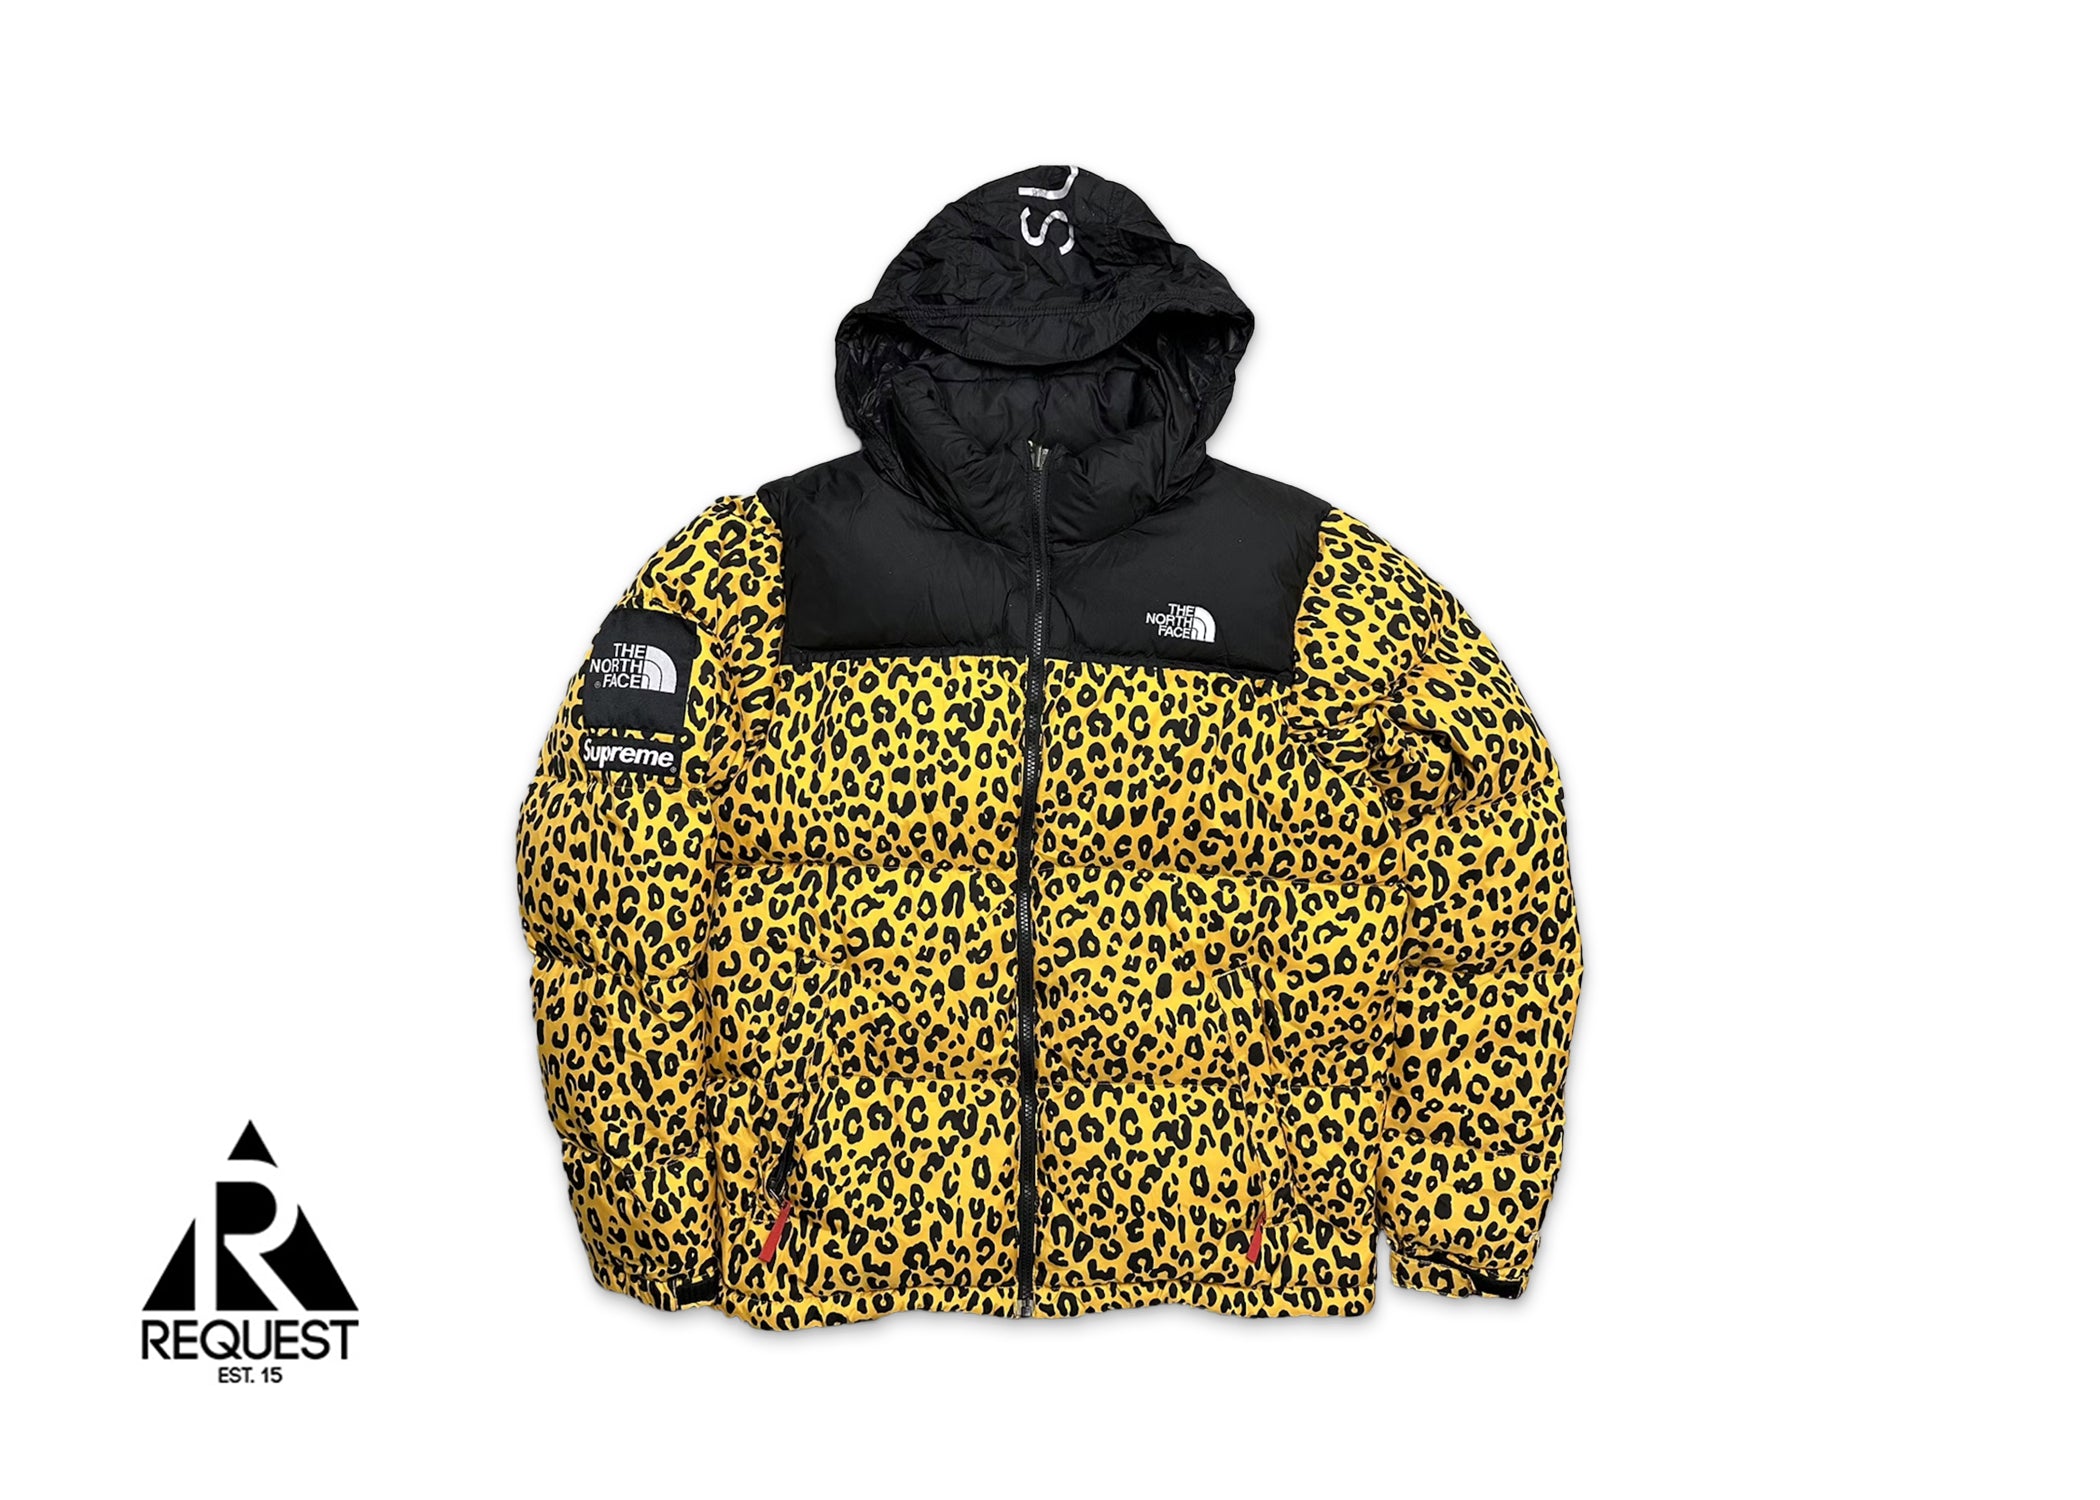 Supreme x The North Face Leopard Nuptse Jacket "Yellow"